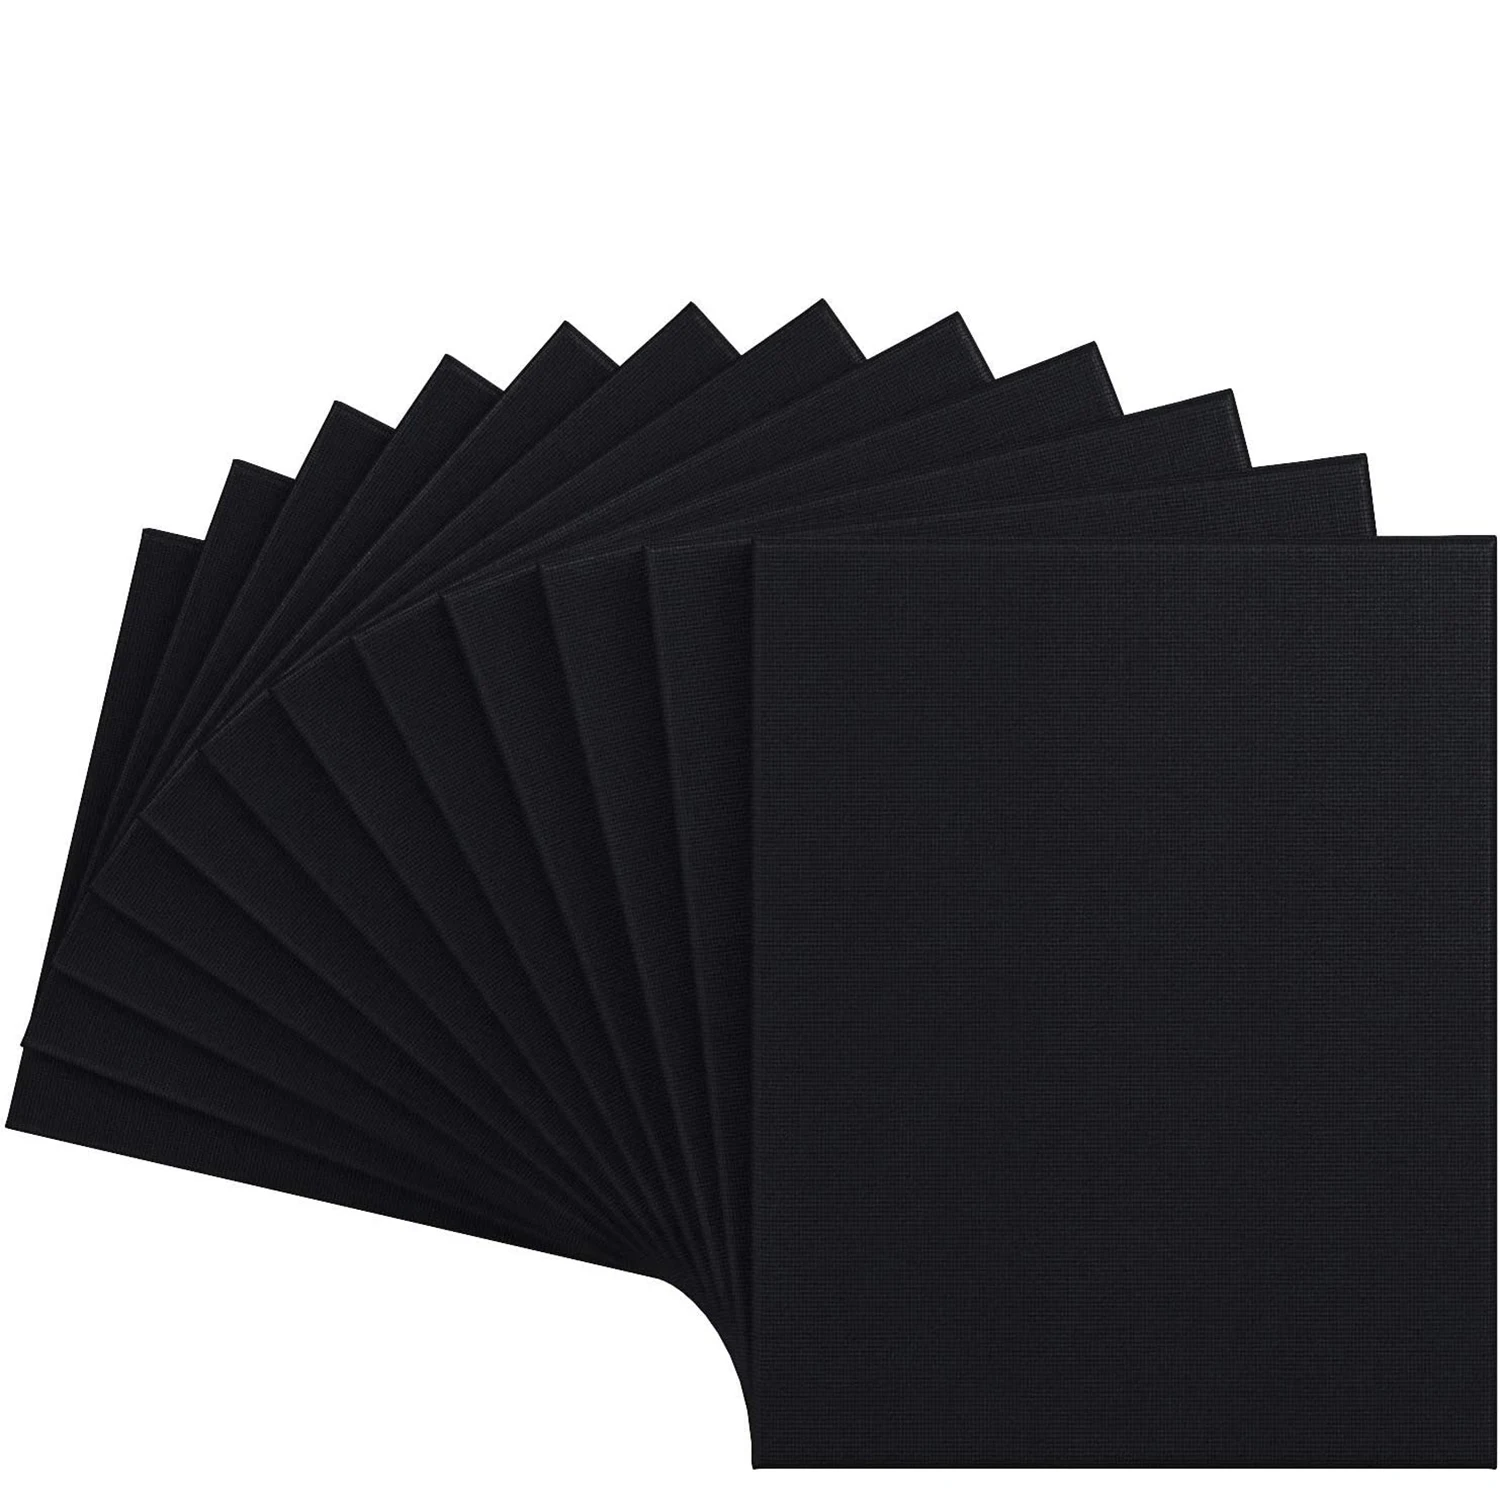 Black Canvas 24x30cm 4-Pack,100% Cotton Primed Acid-Free Stretched Black  Canvases for Painting, Art Supplies for Acrylic Pouring - AliExpress